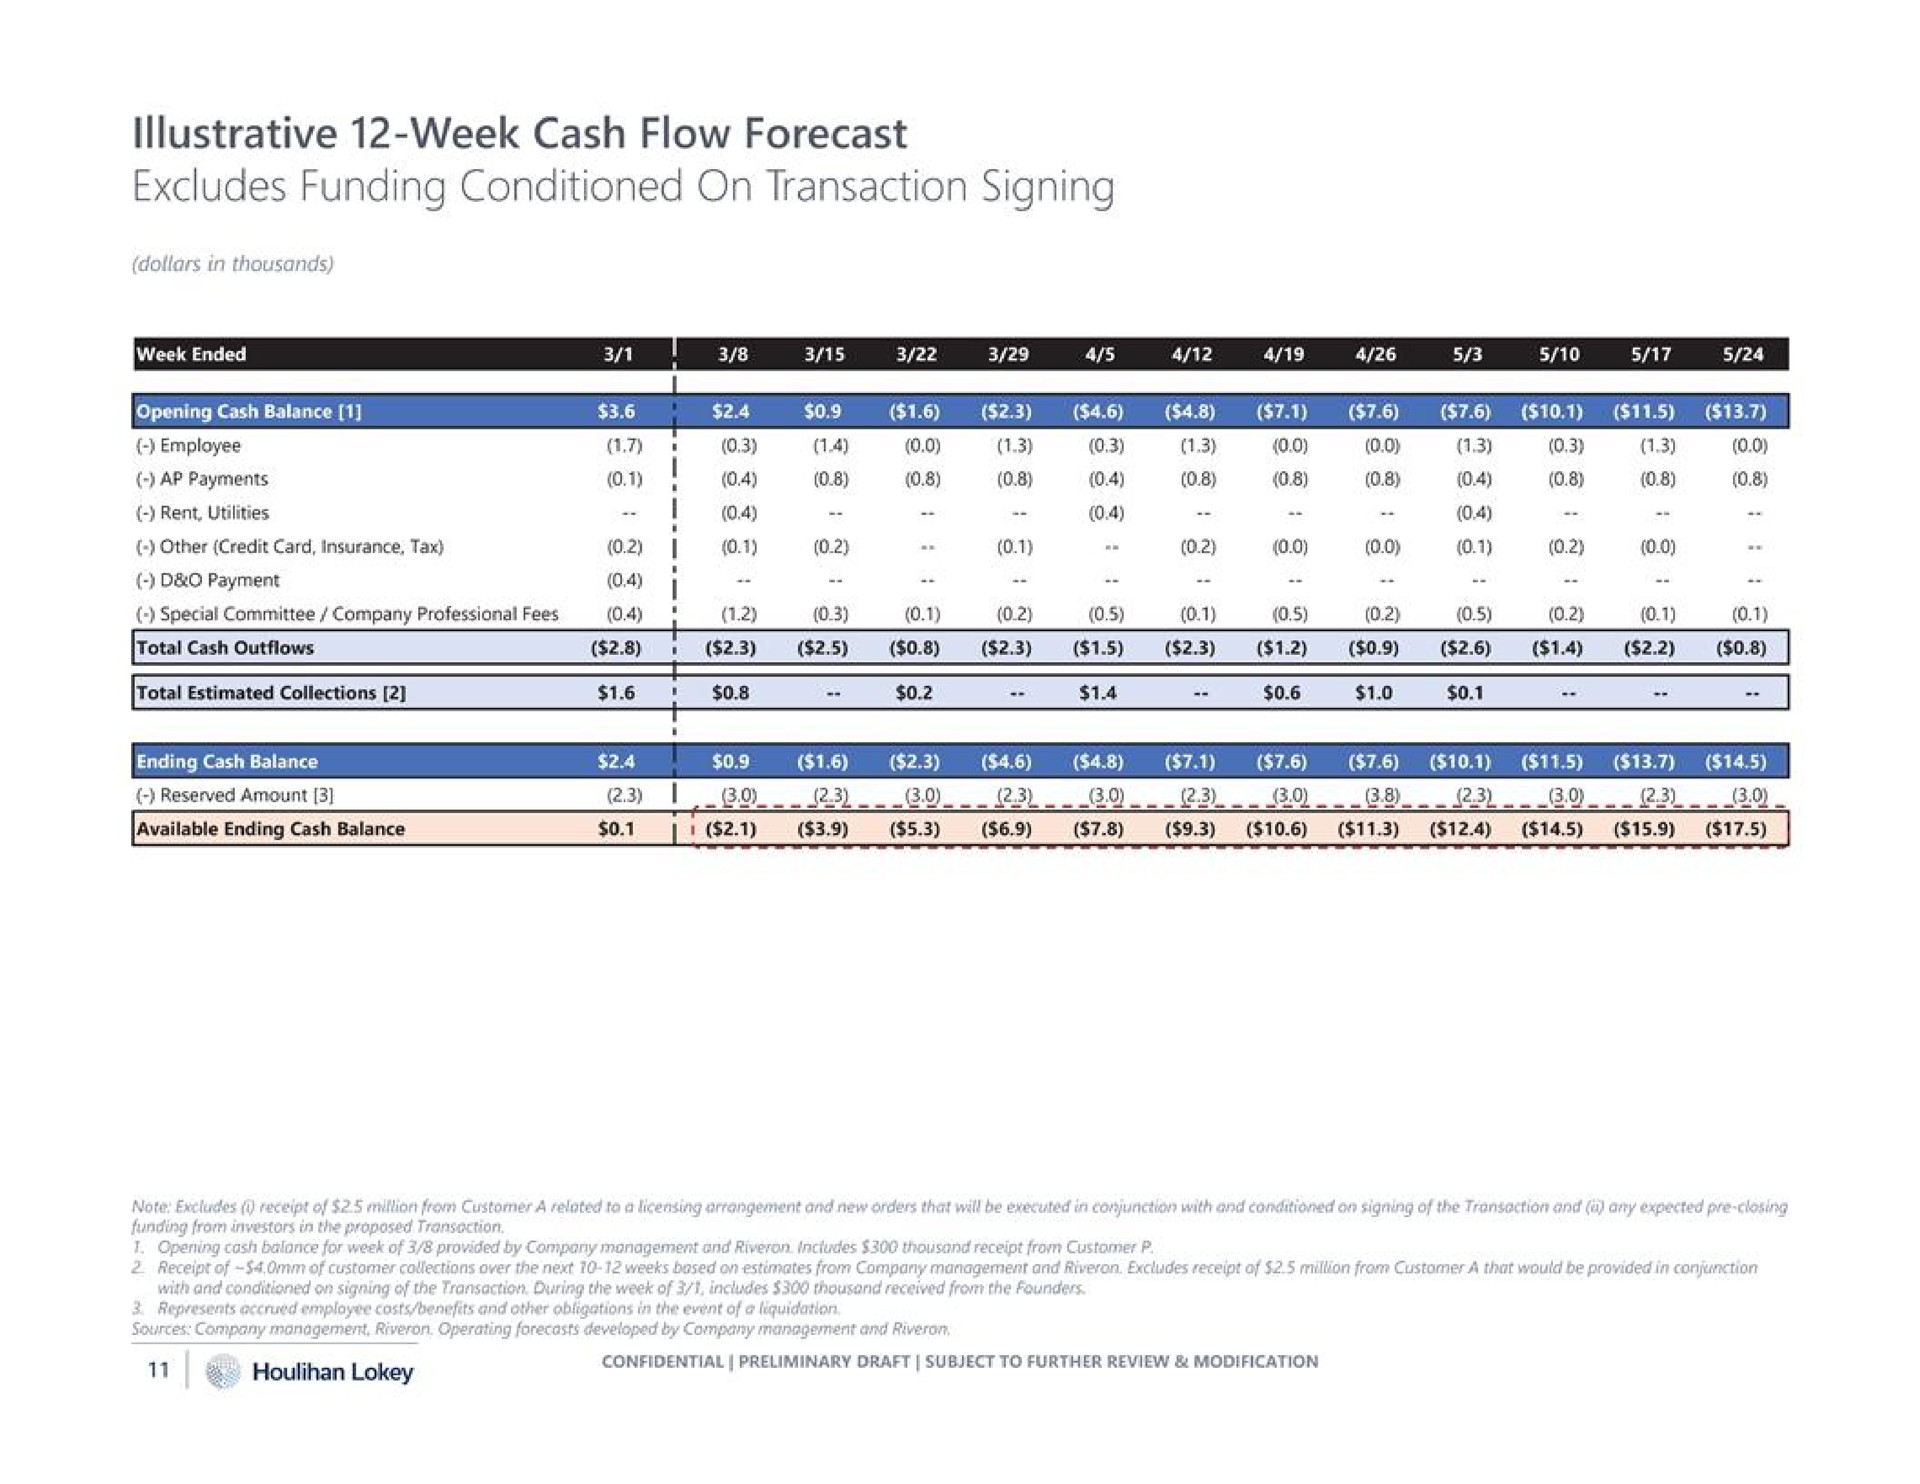 illustrative week cash flow forecast excludes funding conditioned on transaction signing | Houlihan Lokey